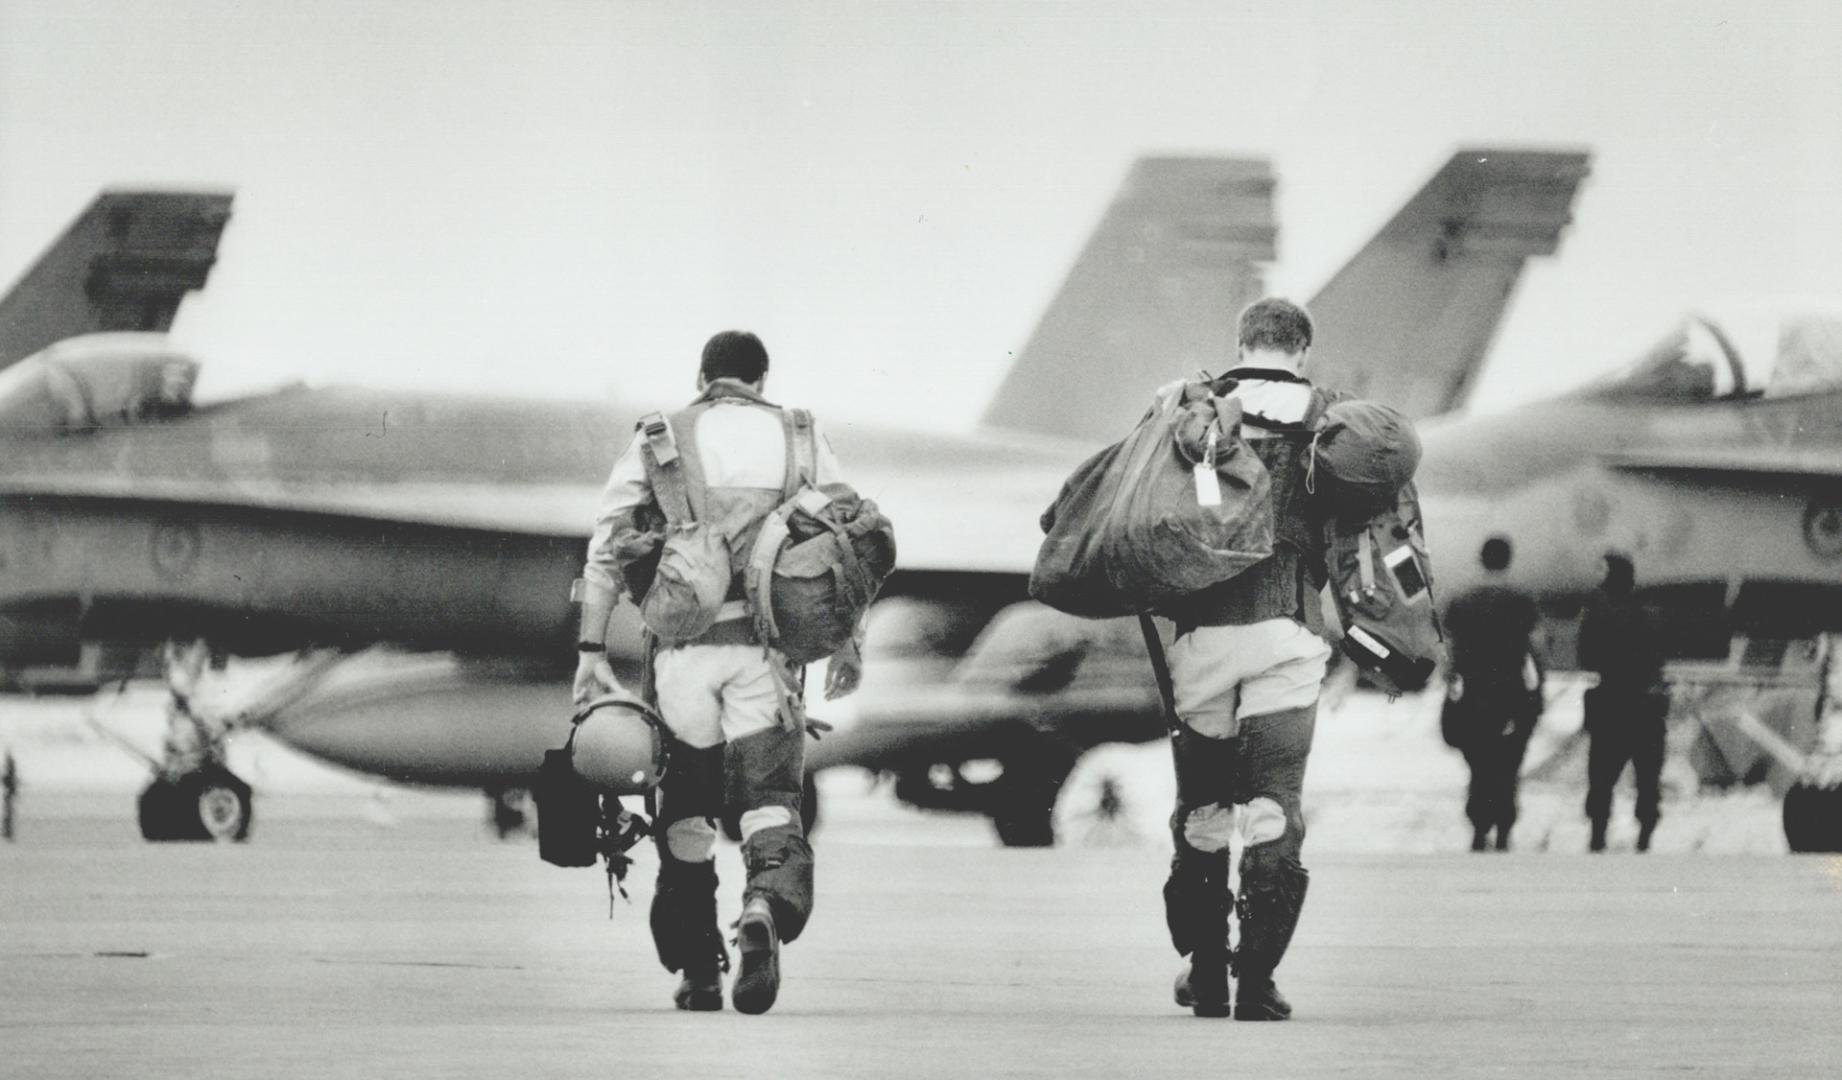 Ready for battle, Two Canadian pilots, loaded with gear, head to their CF-18s at Canada Dry 2 near Qatar